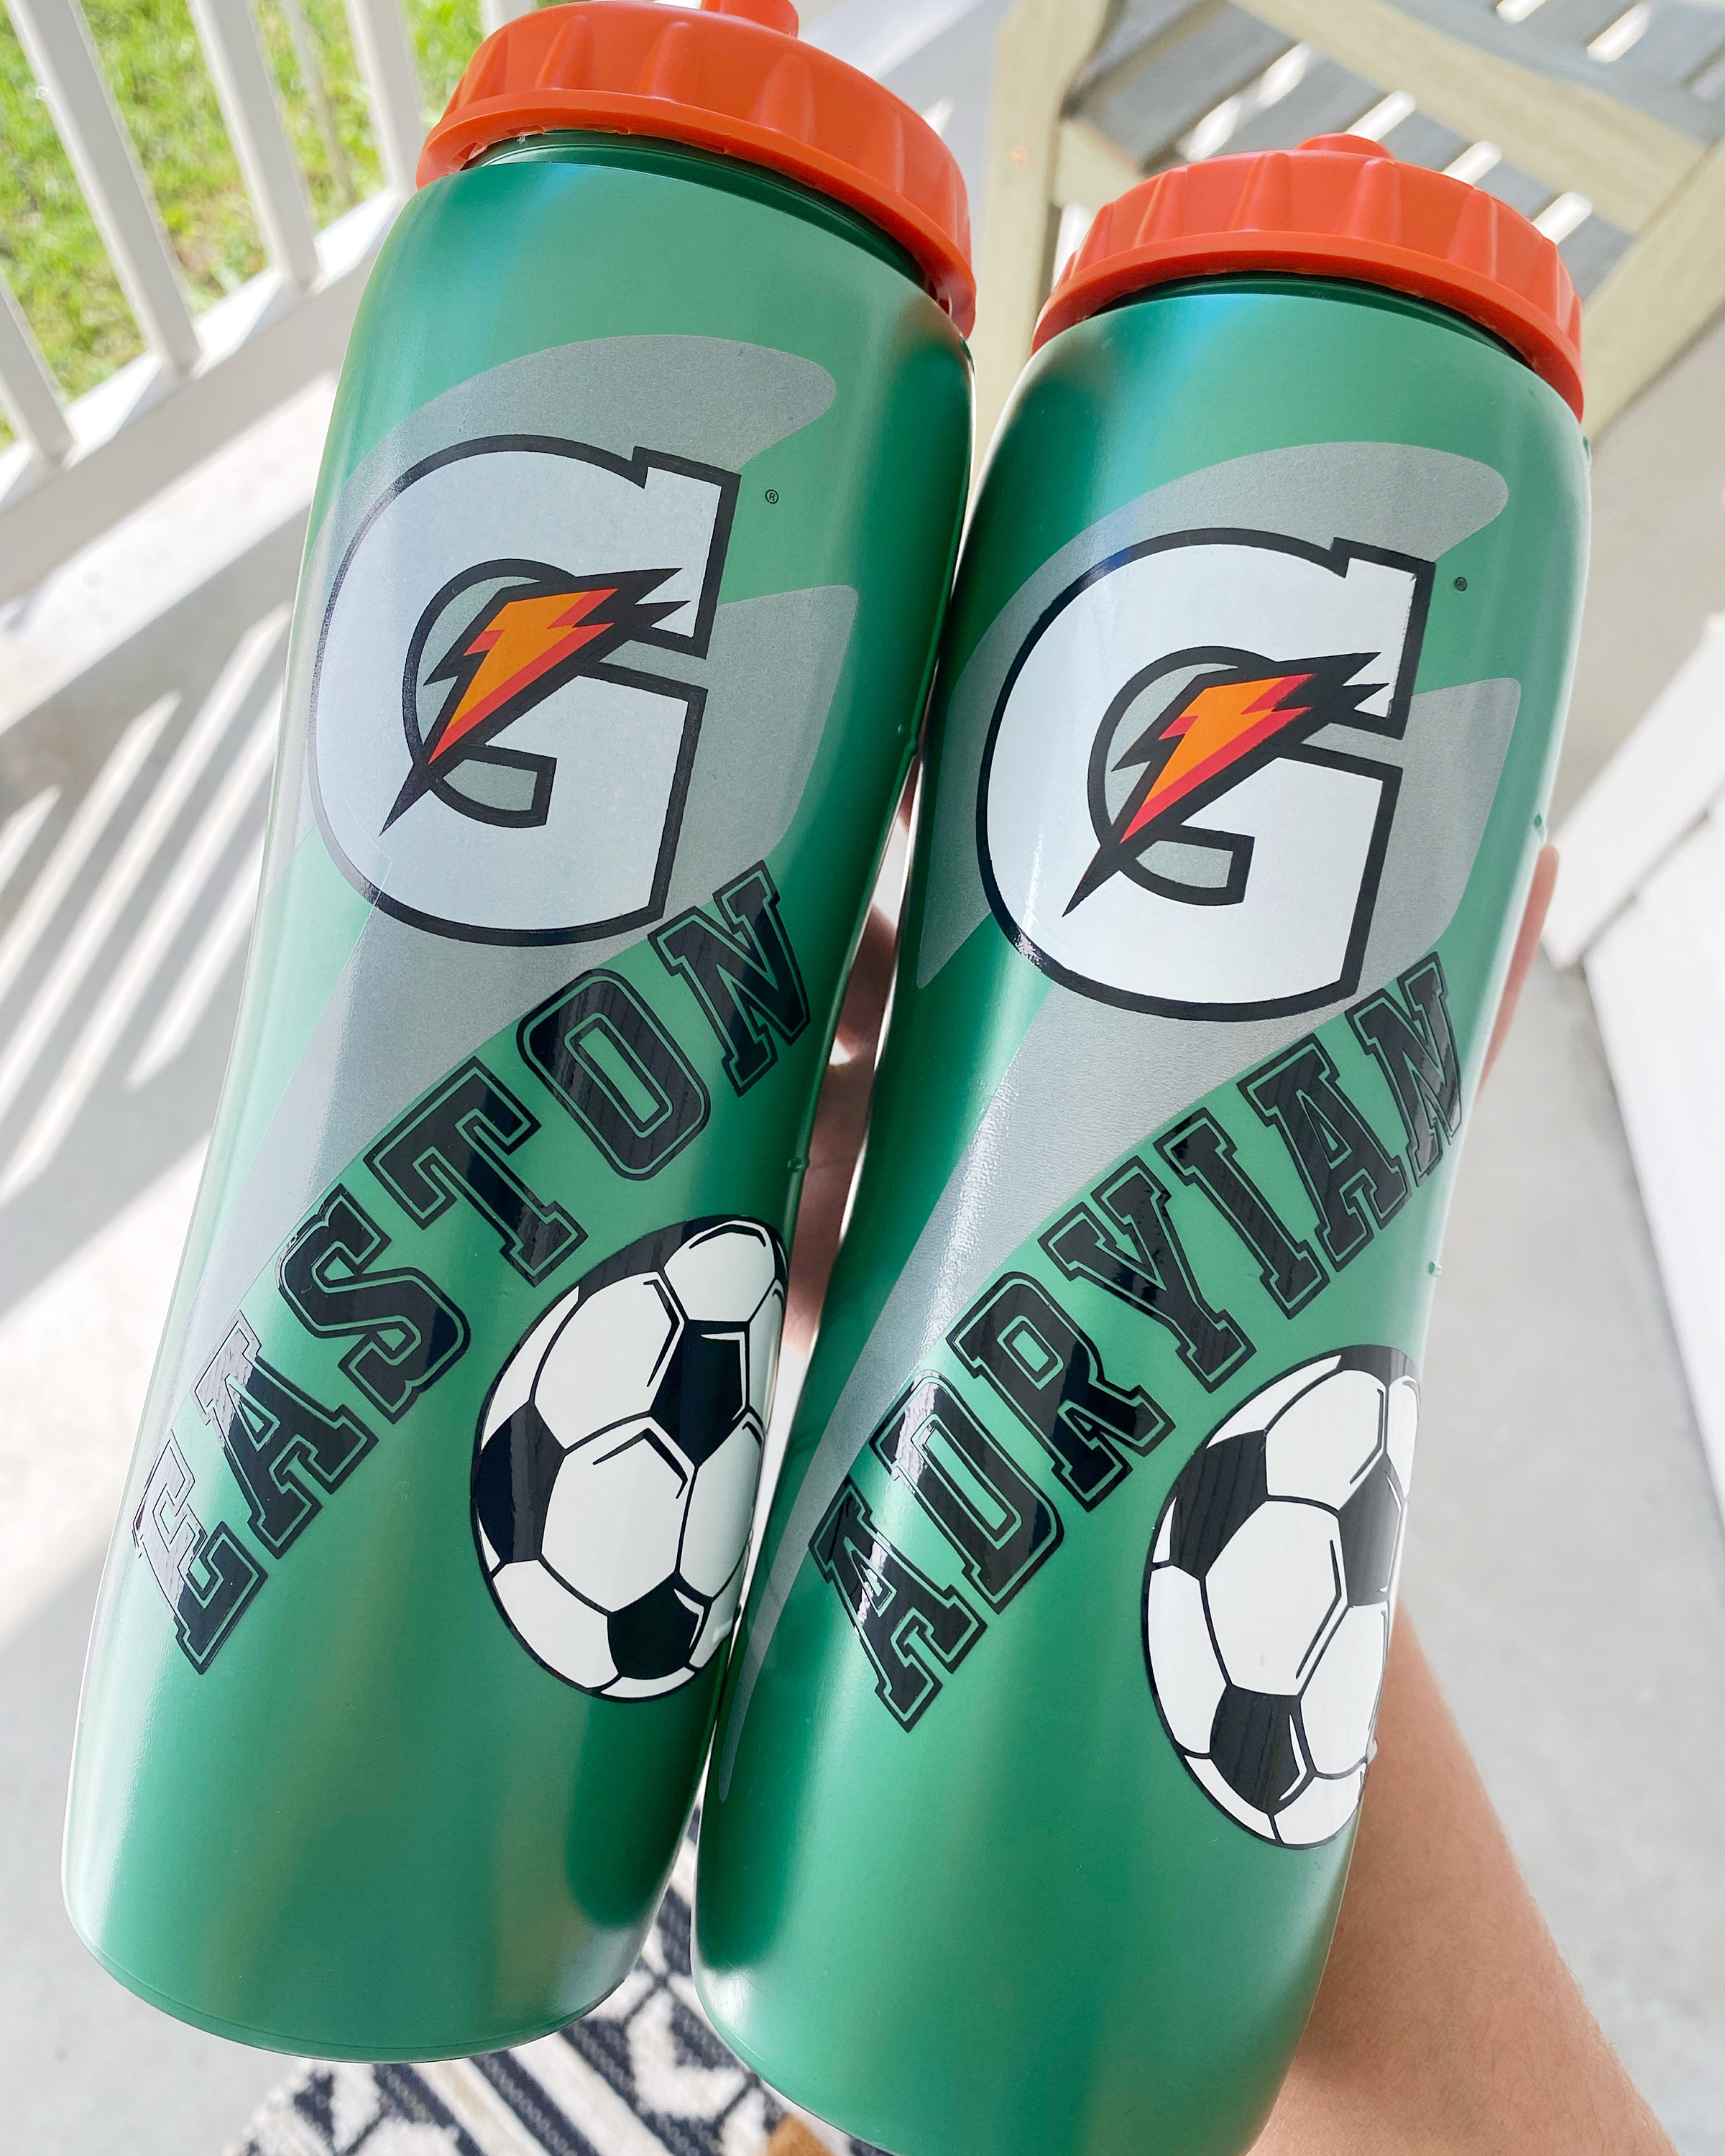 GATORADE SQUEEZE SPORTS WATER BOTTLE SOCCER CHAMPIONS LEAGUE 32 OZ